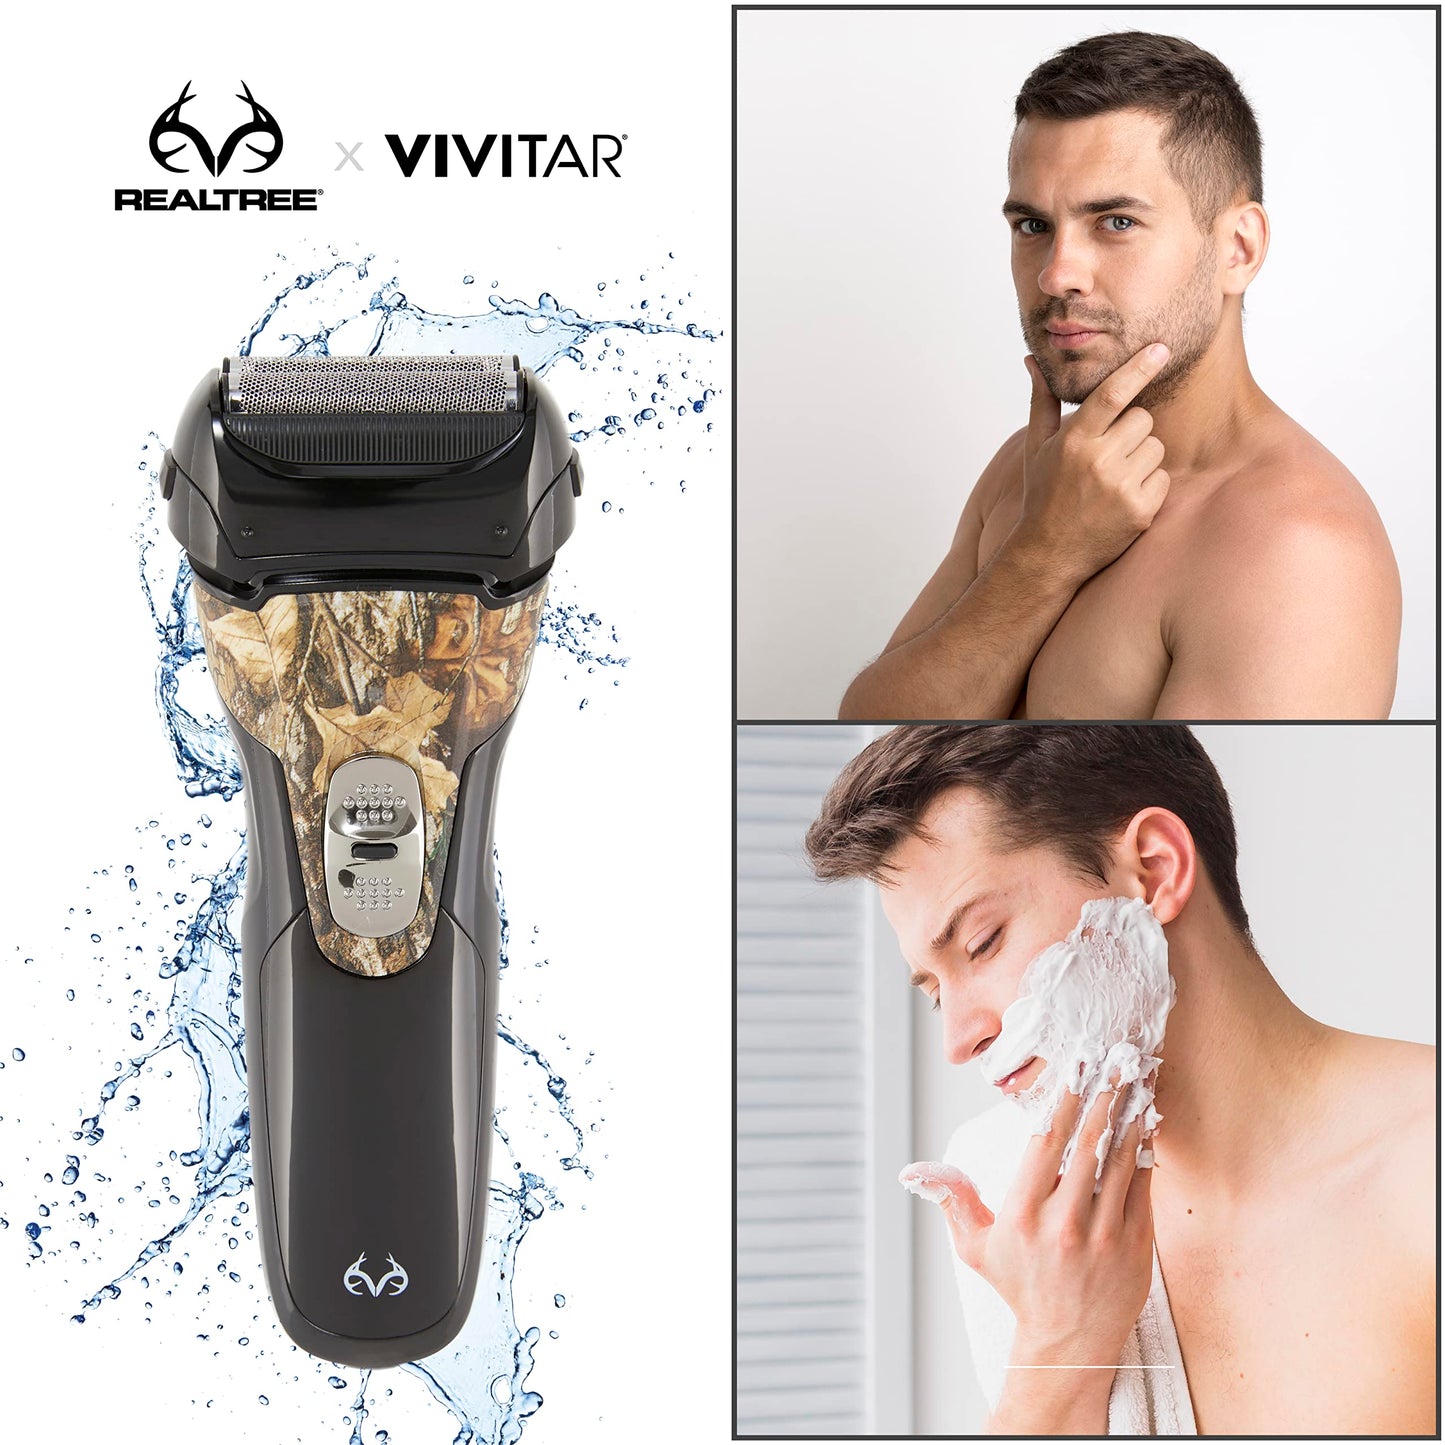 Realtree Premium Electric Shaver for Men’s Beard Shaving, Trimming, and Grooming, Cordless, 2 Blade Foil Shaver, Stainless Steel, USB Rechargeable with Lithium Ion Battery, Wet/Dry Use, LED Display